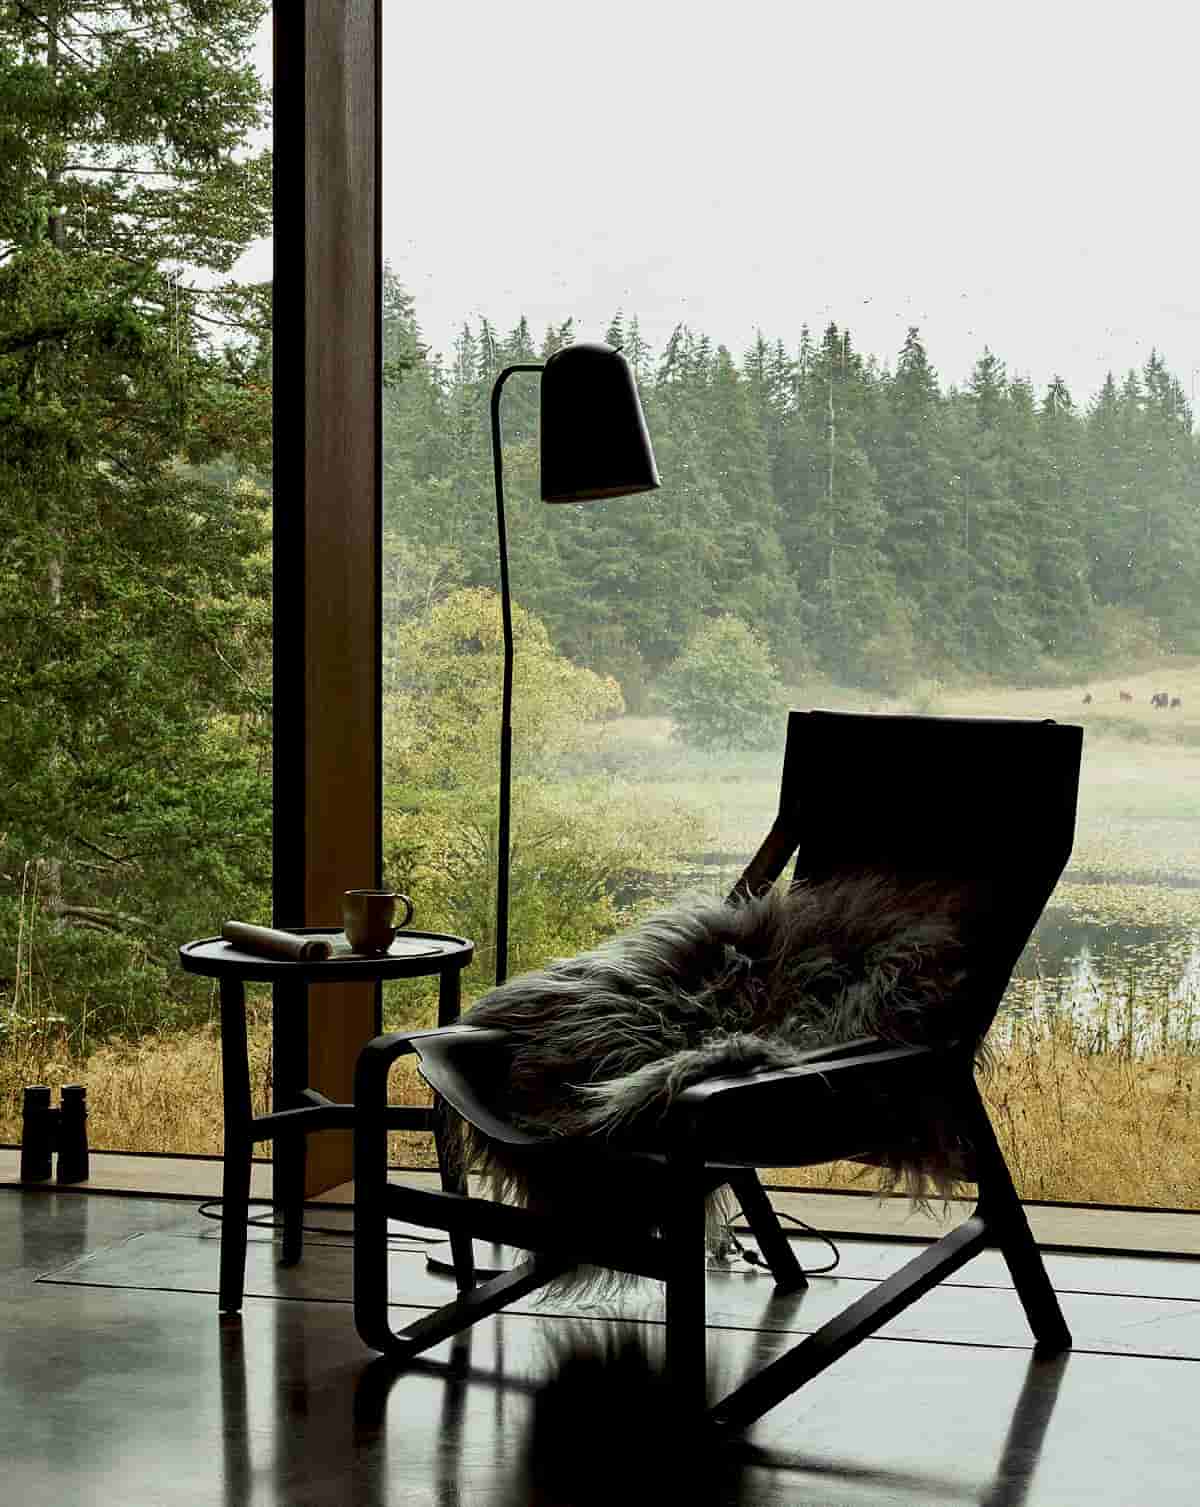 A Modern Castle Hidden On The Edge Of A Dense Forest Hillside On Whidbey Island